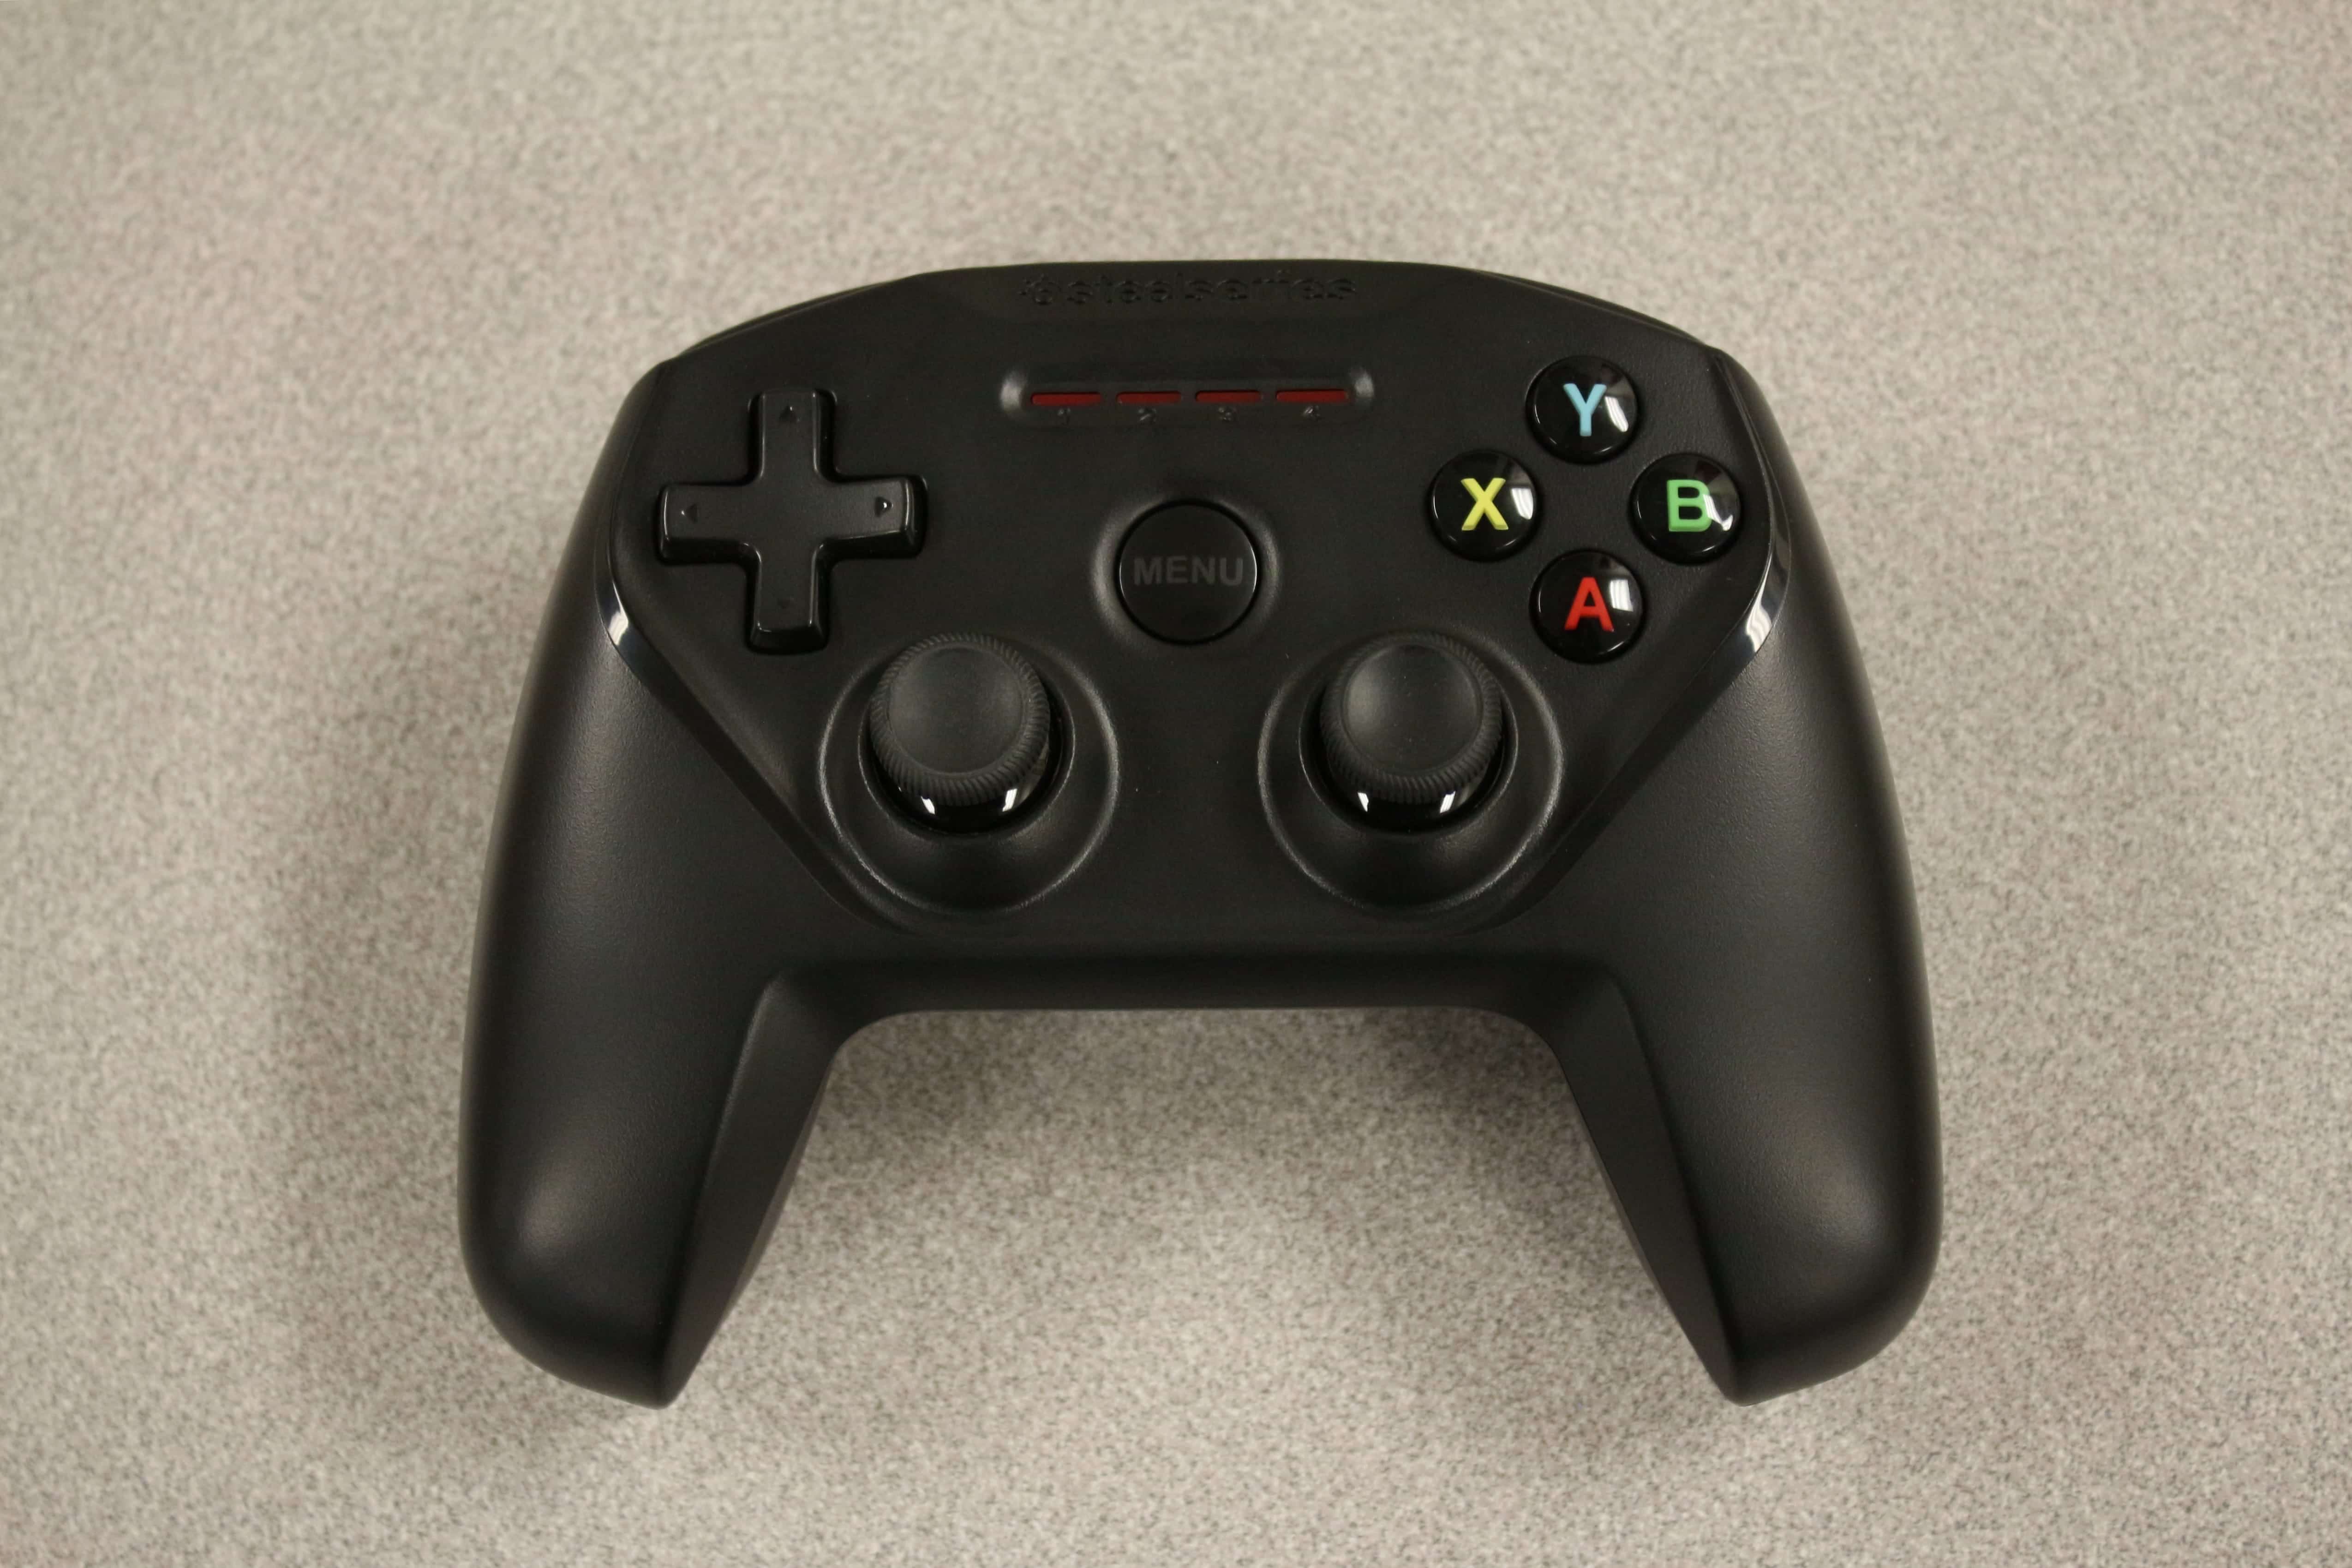 The SteelSeries Nimbus wireless gaming controller. ($45)